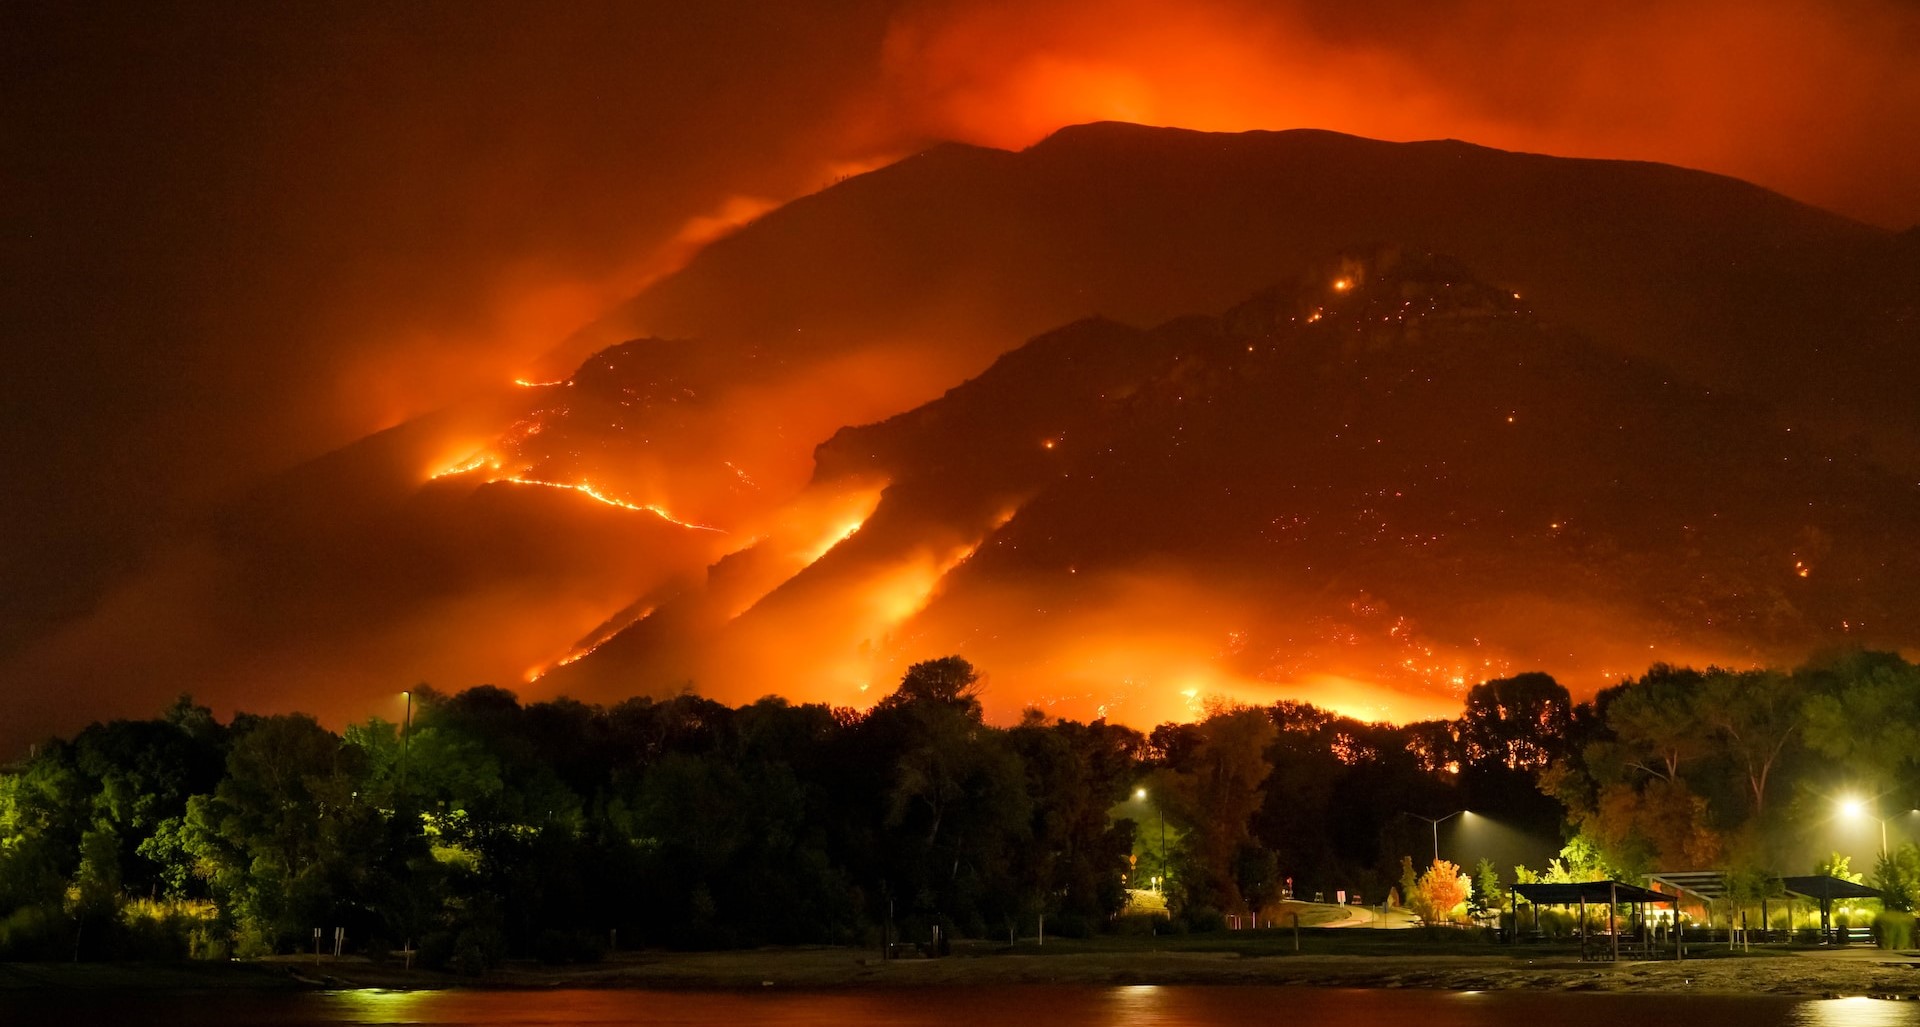 Forest fire engulfs a mountain at night overlooking a forest and river settlement below